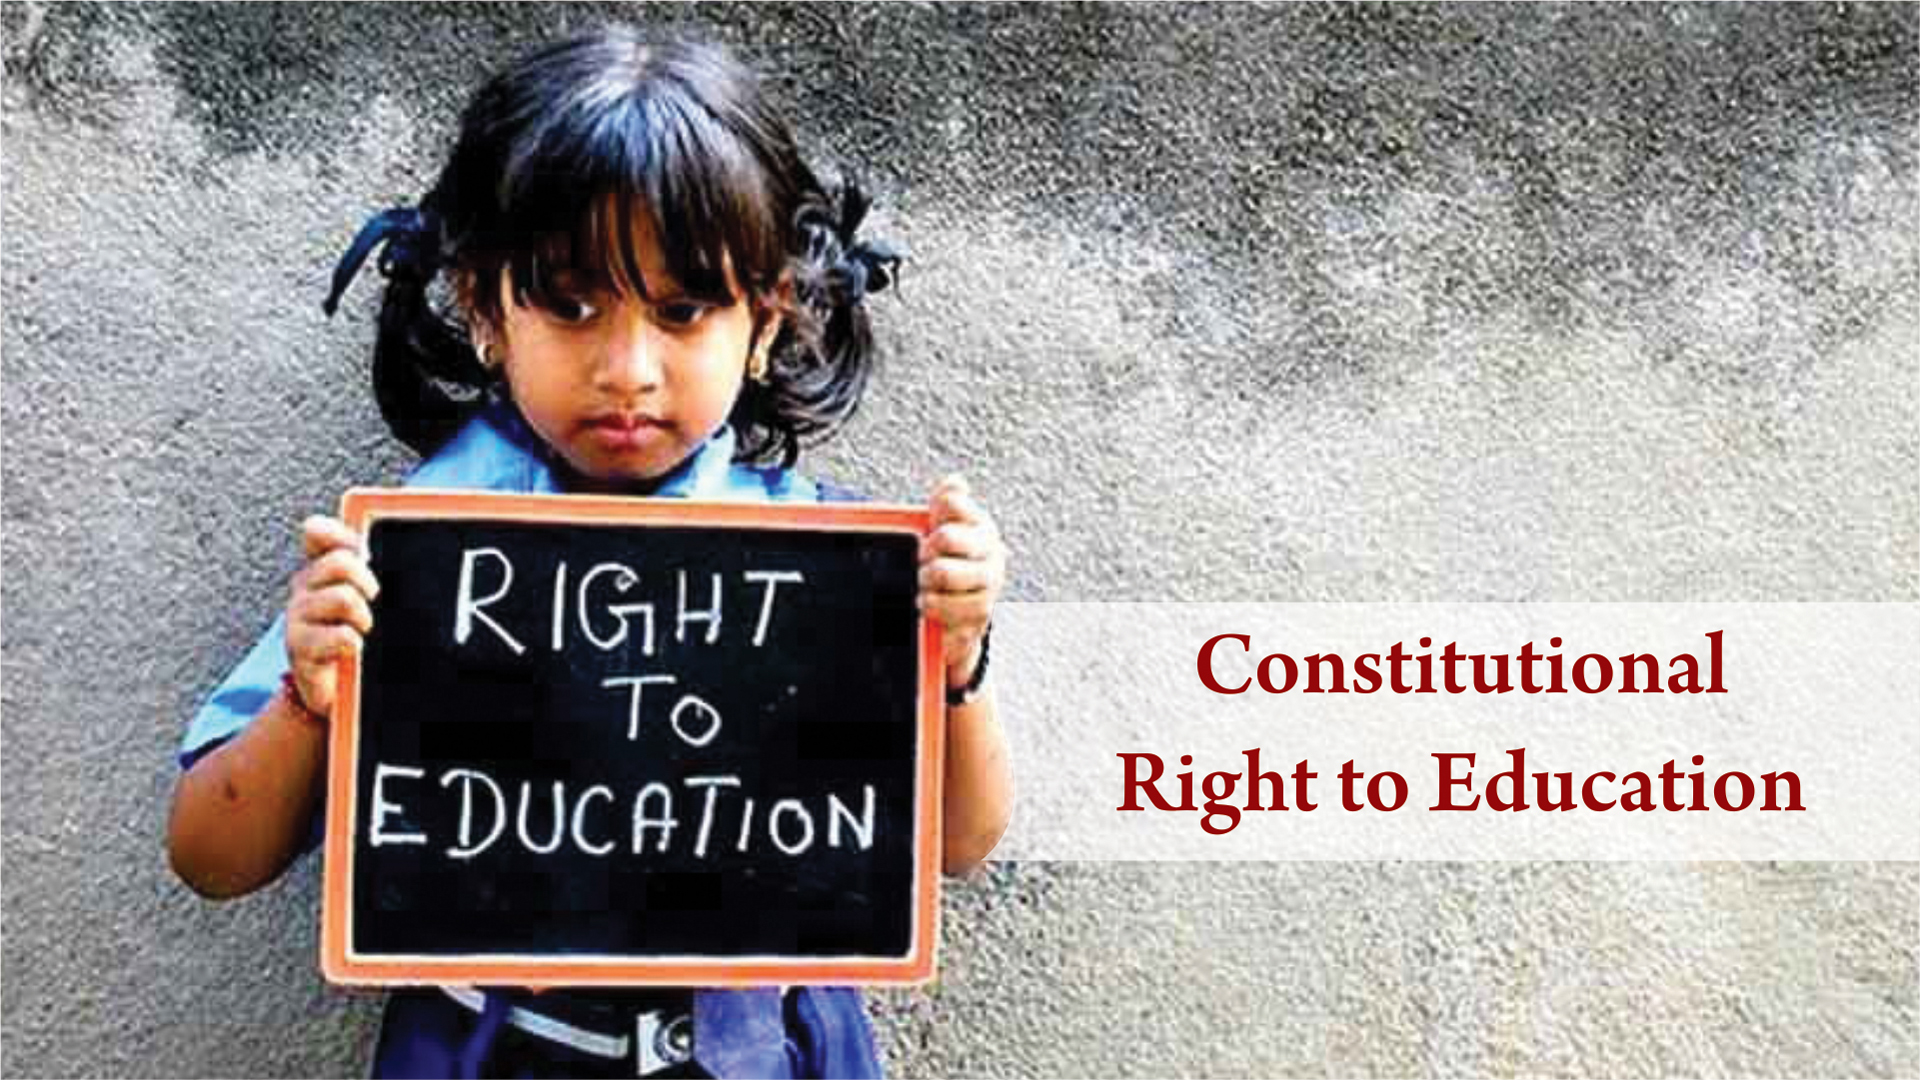 an essay on right to education